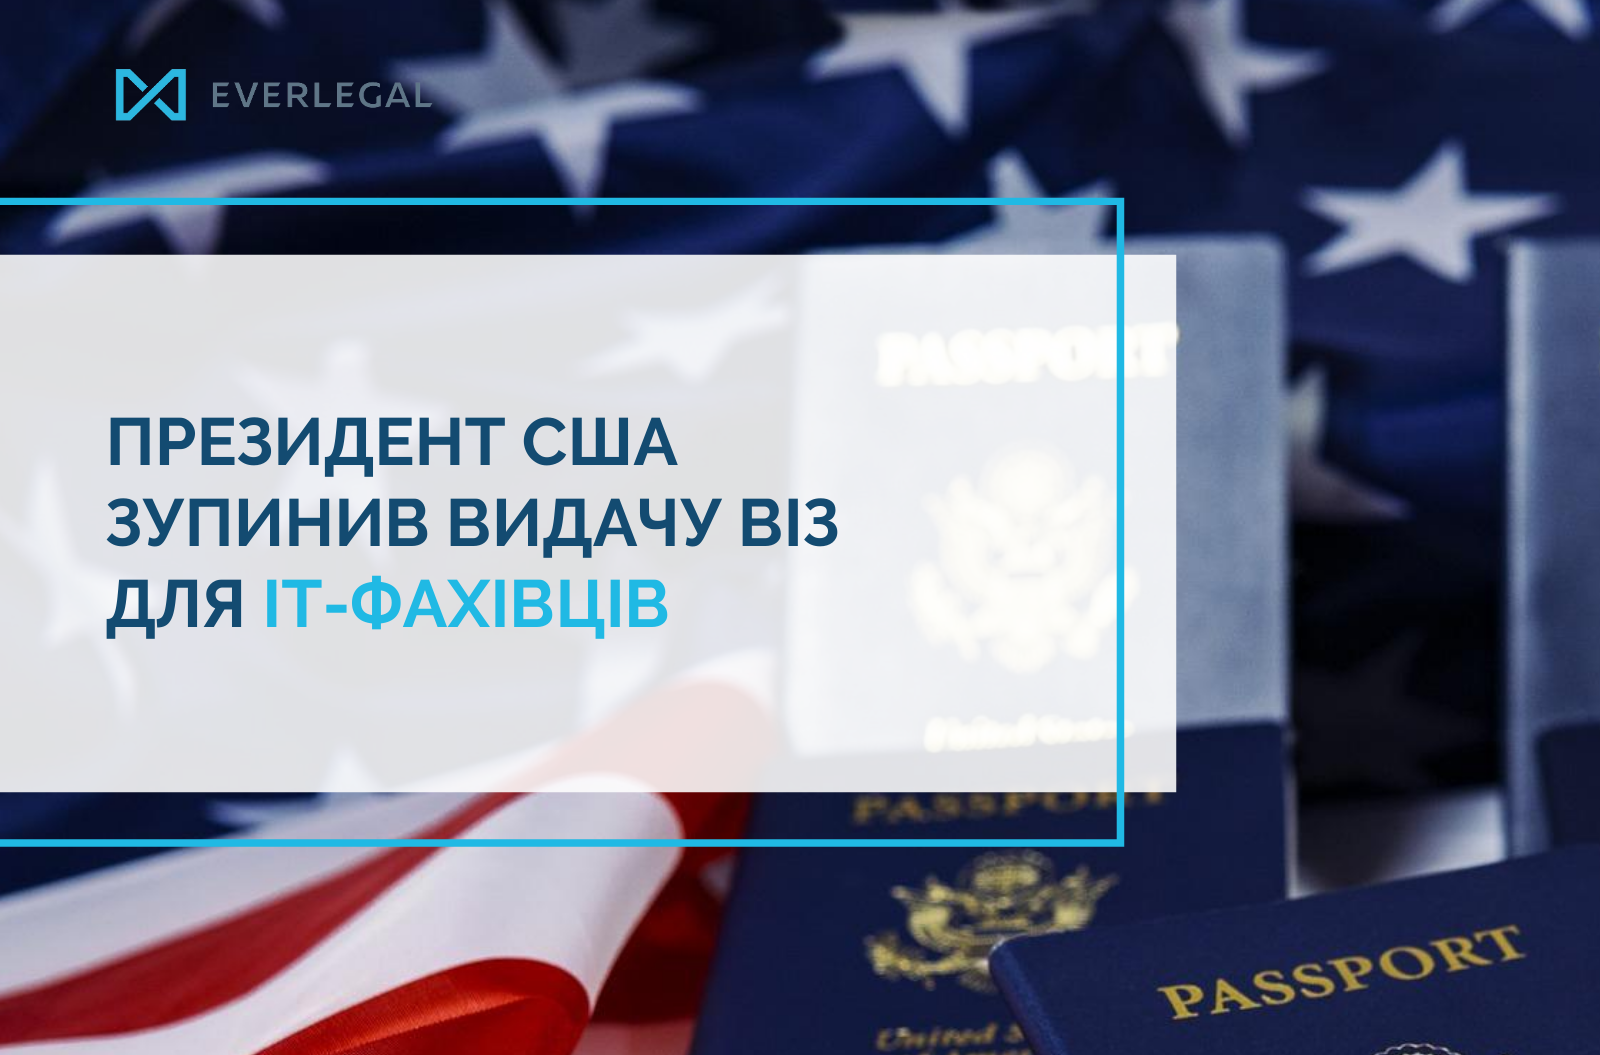 Visas for IT professionals has been suspended in the USA